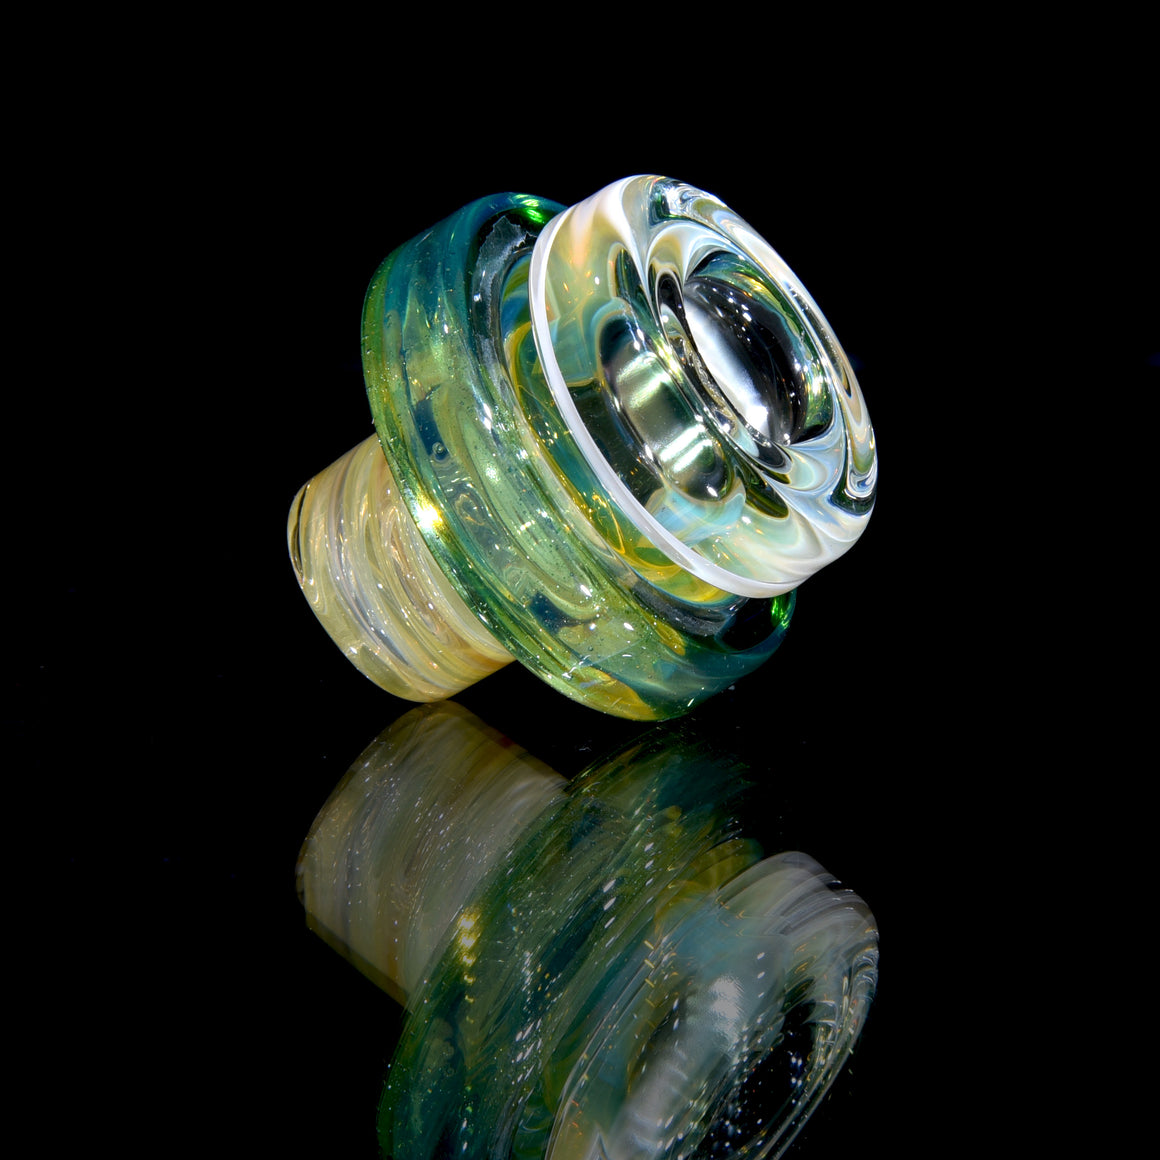 Gold & Silver-fumed Dual-hole Spinner Cap w/ Green Stardust Accent